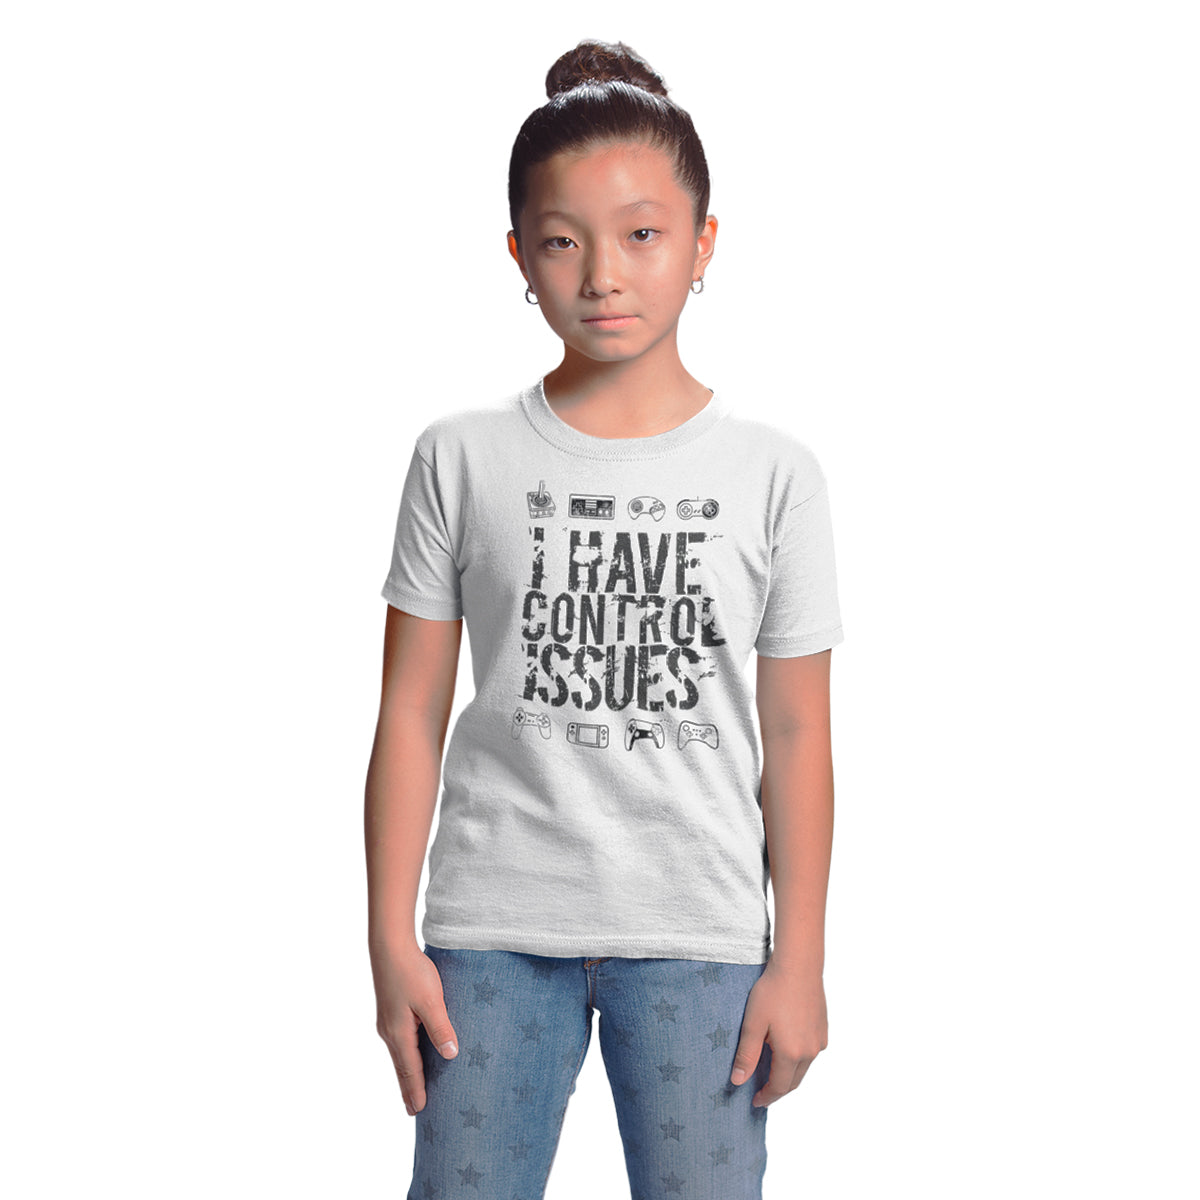 Youth 'Control Issues' Premium Organic T-Shirt